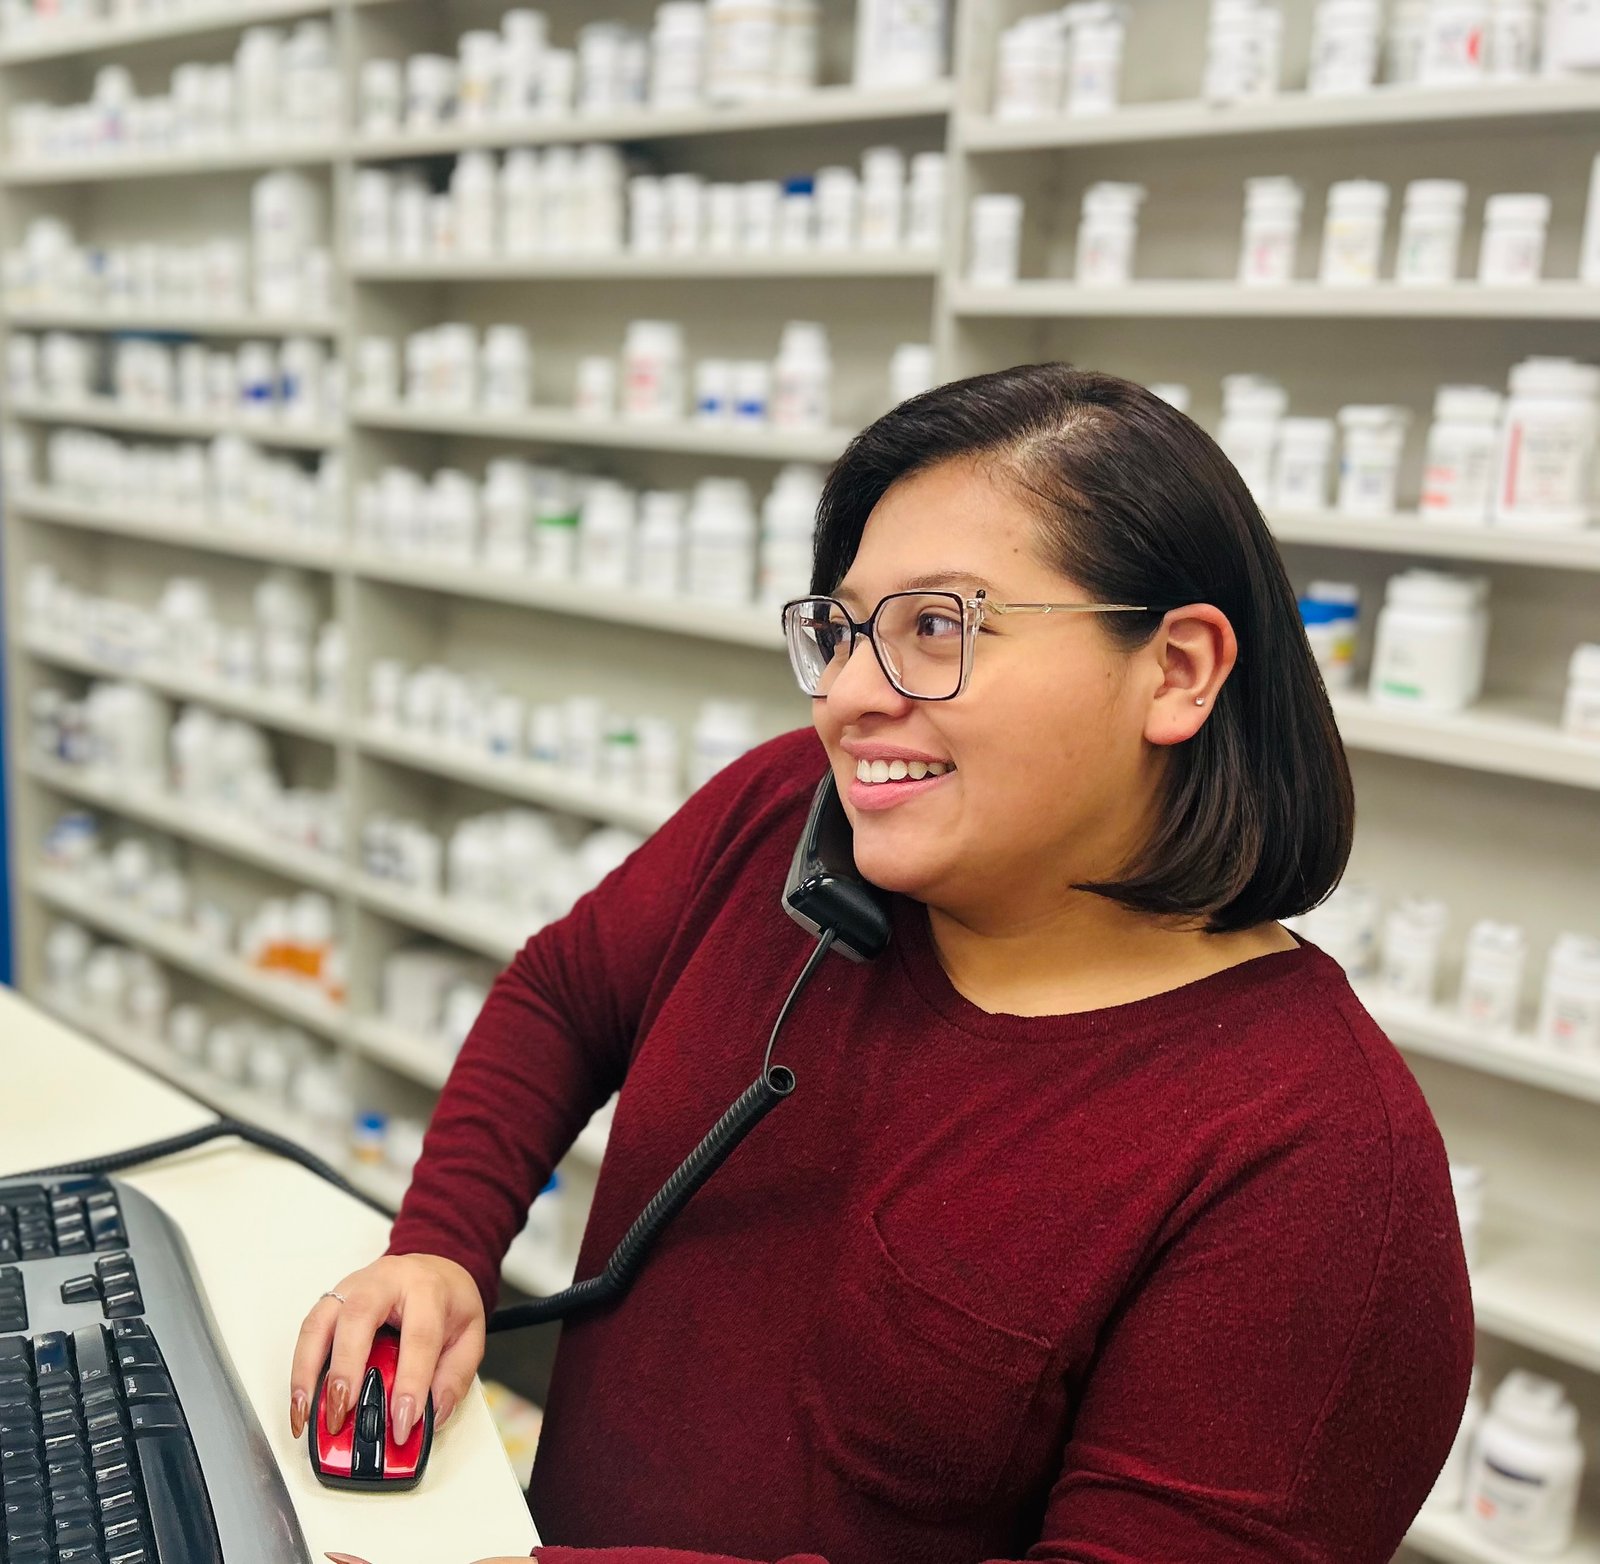 Meet Victoria, our Pharmacy Technician. Pharmacy Technicians are the unsung heroes at any high-functioning pharmacy, and it’s no different at Shady Grove Pharmacy.